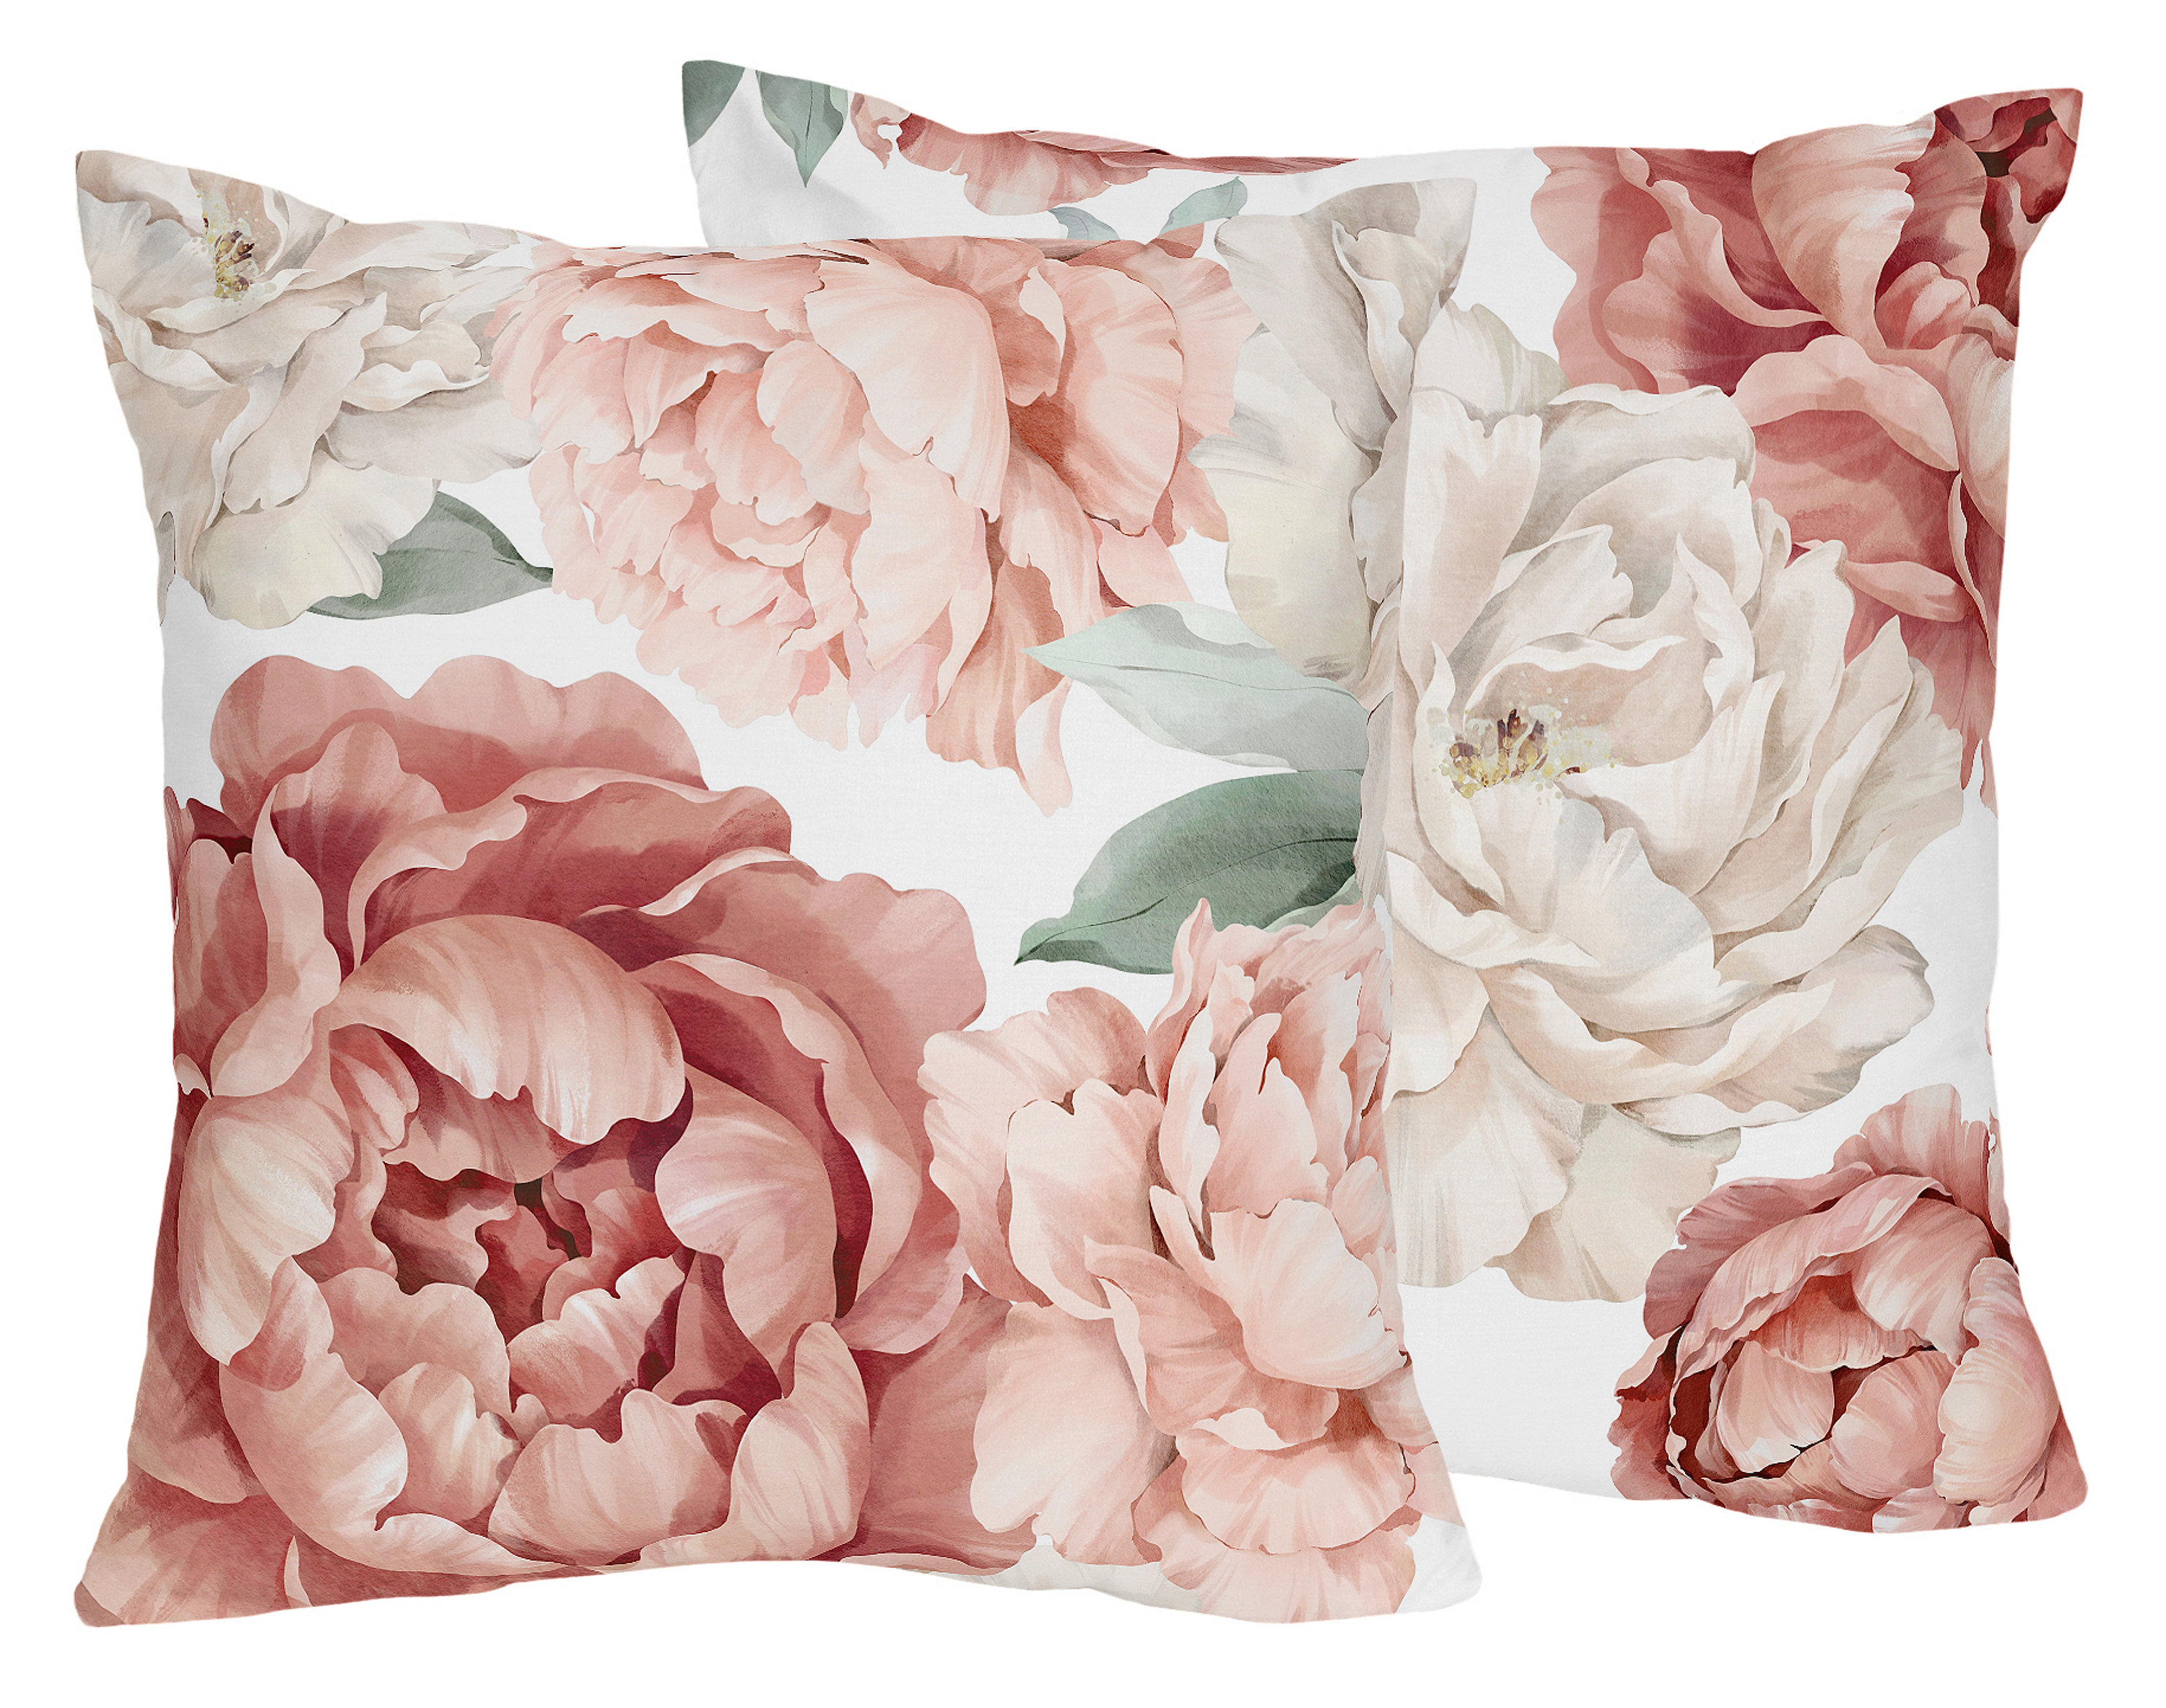 Sweet Jojo Designs Rose White Collection Decorative Accent Throw Pillows | Set of 2